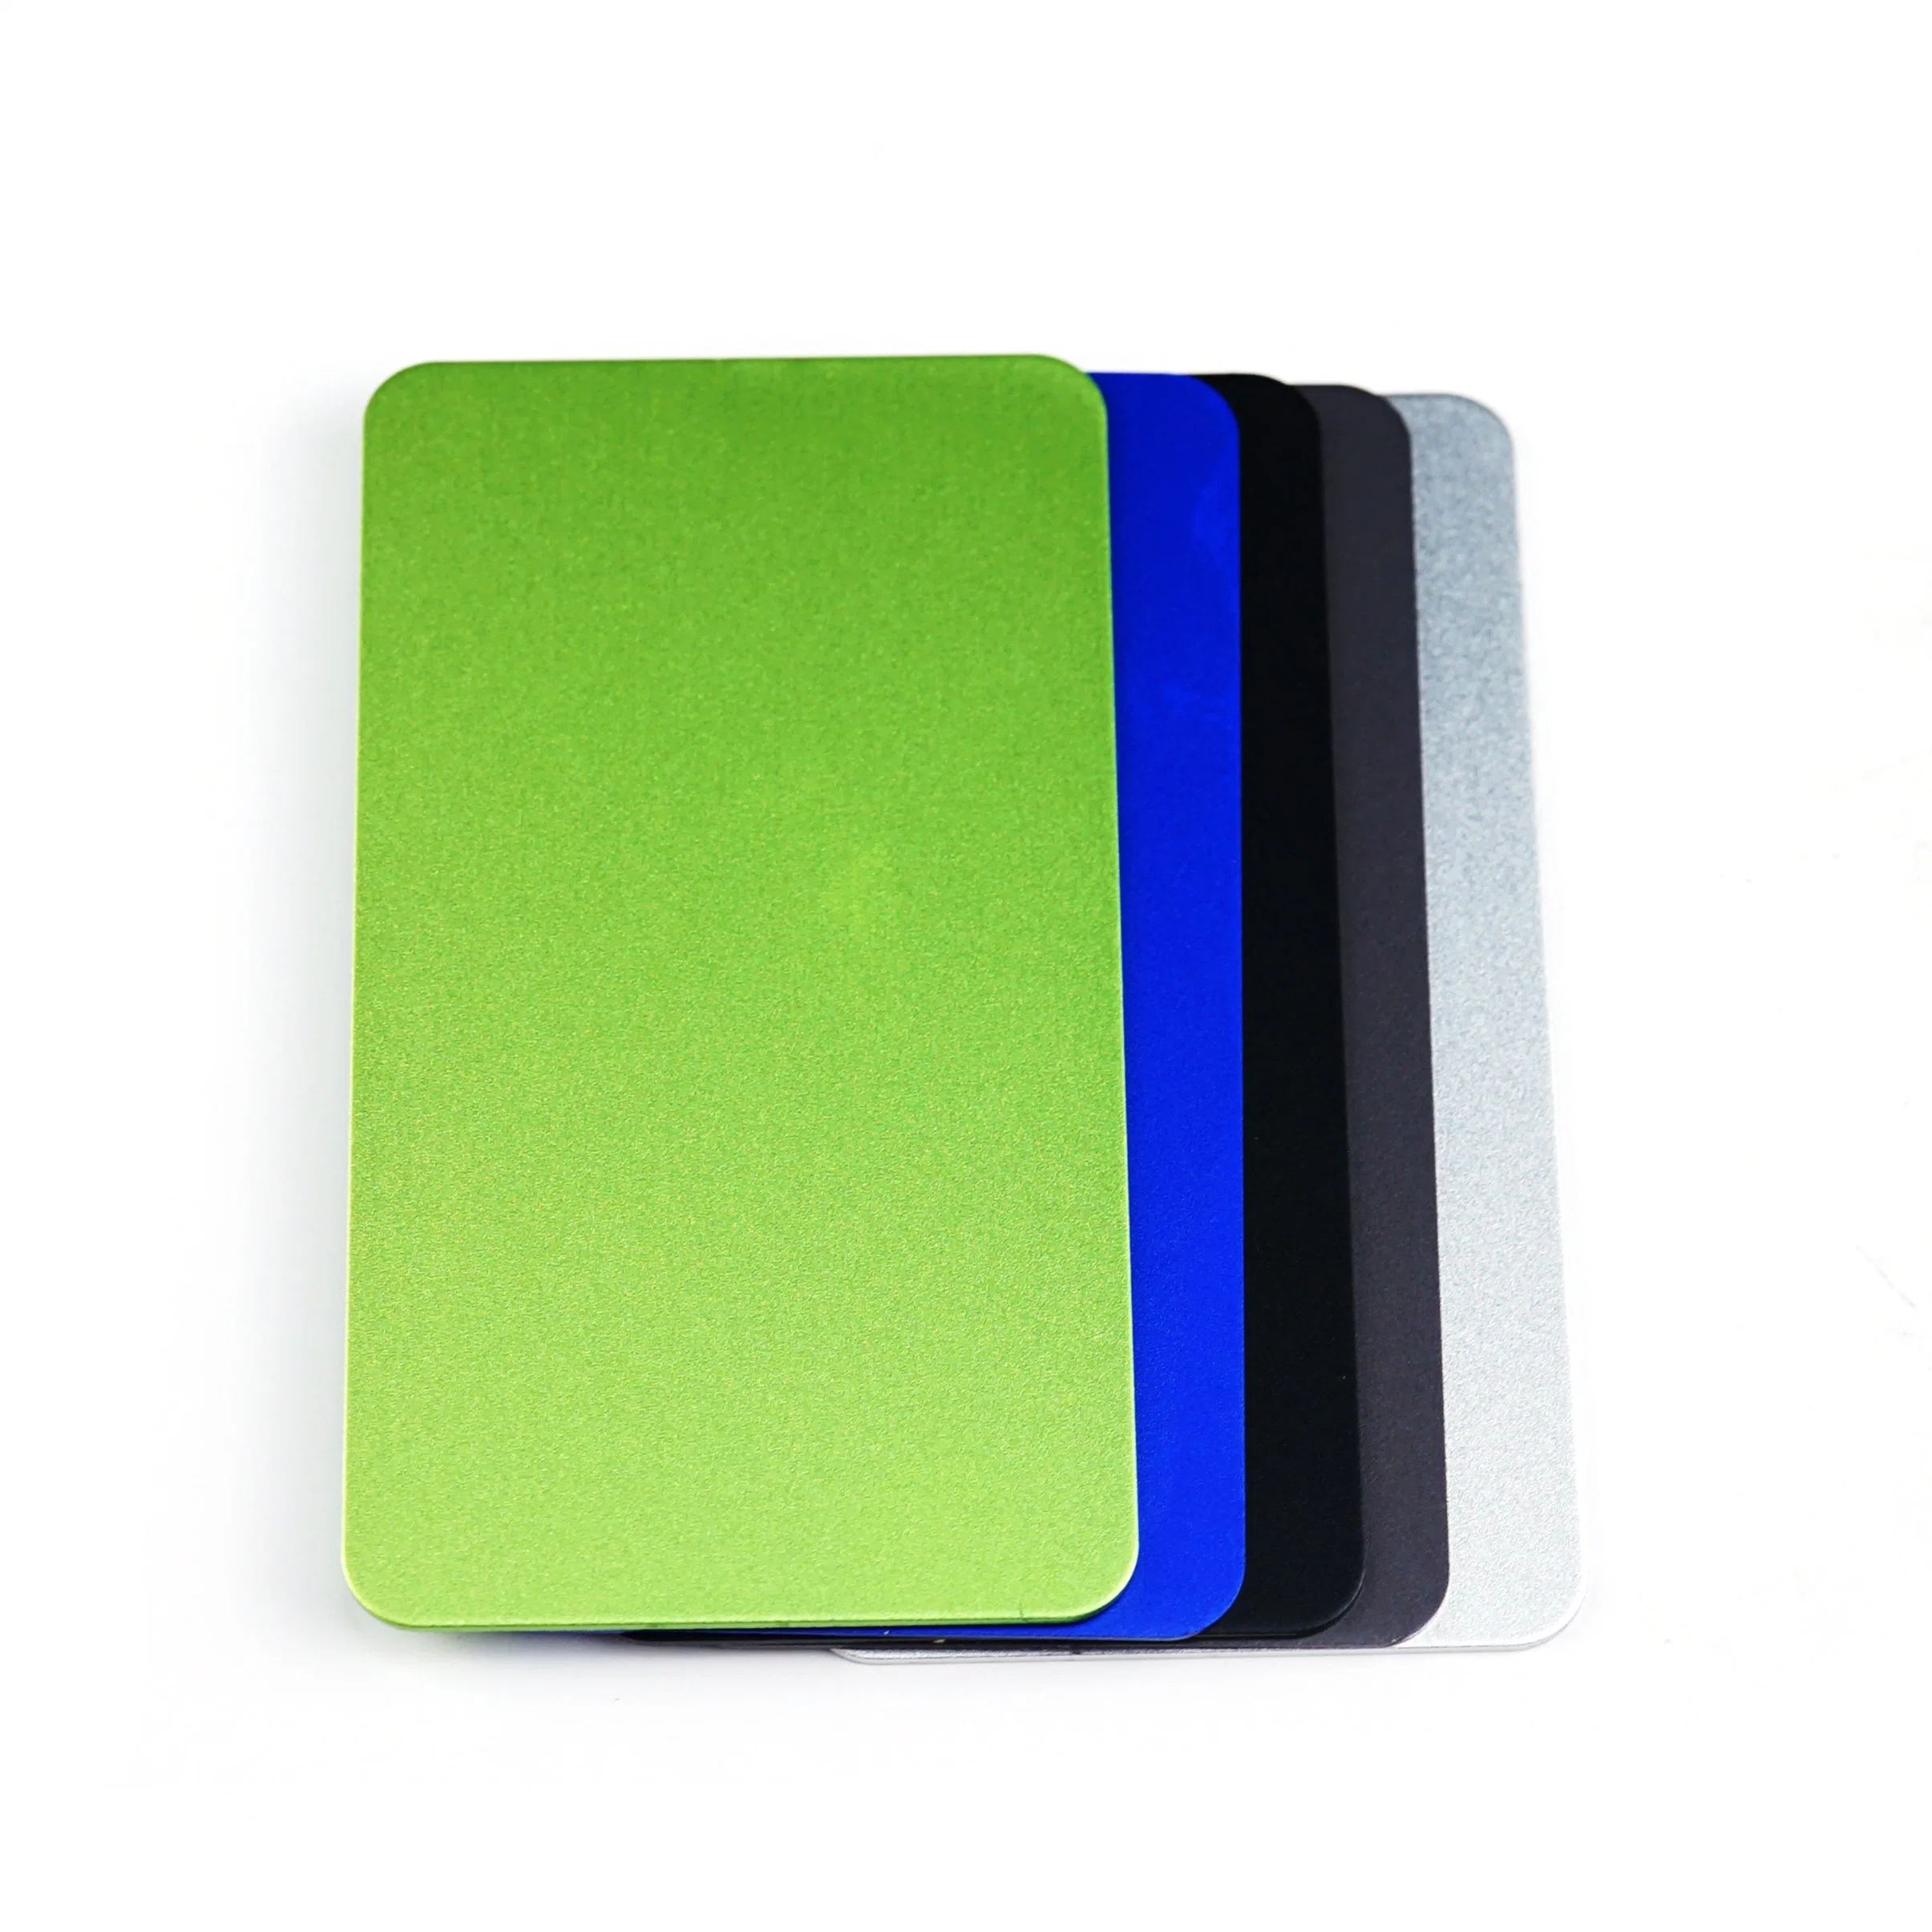 Anodized Aluminum Business Card 0.8mm Anodized Aluminum Business Cards Blanks Sheet Metal Fabrication